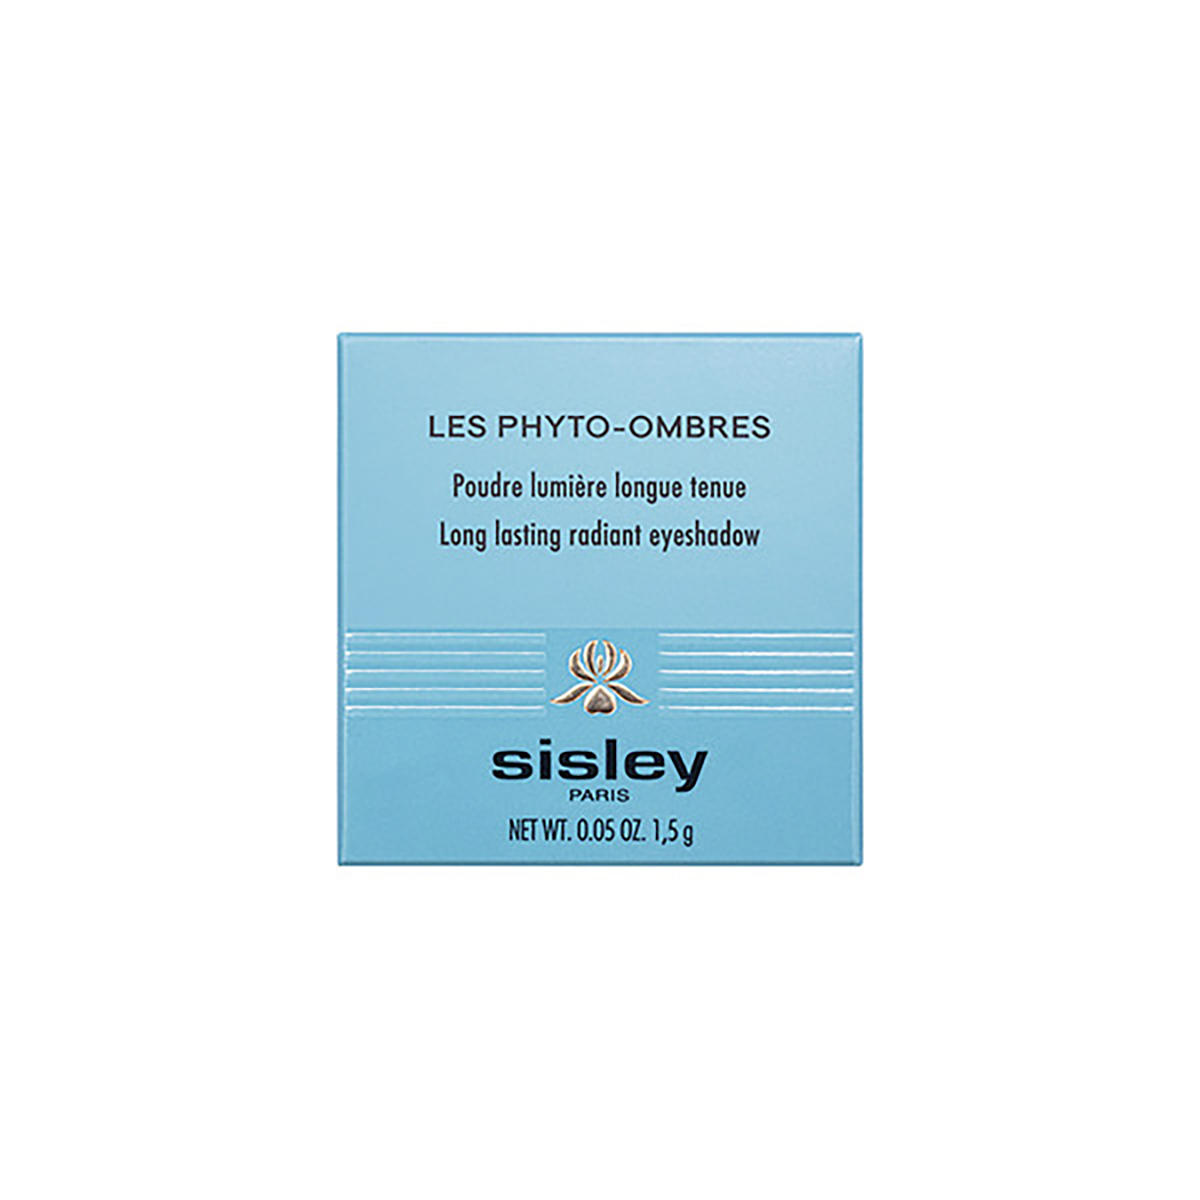 Sisley Paris Phyto-Ombres 11 Mat Nude - 4